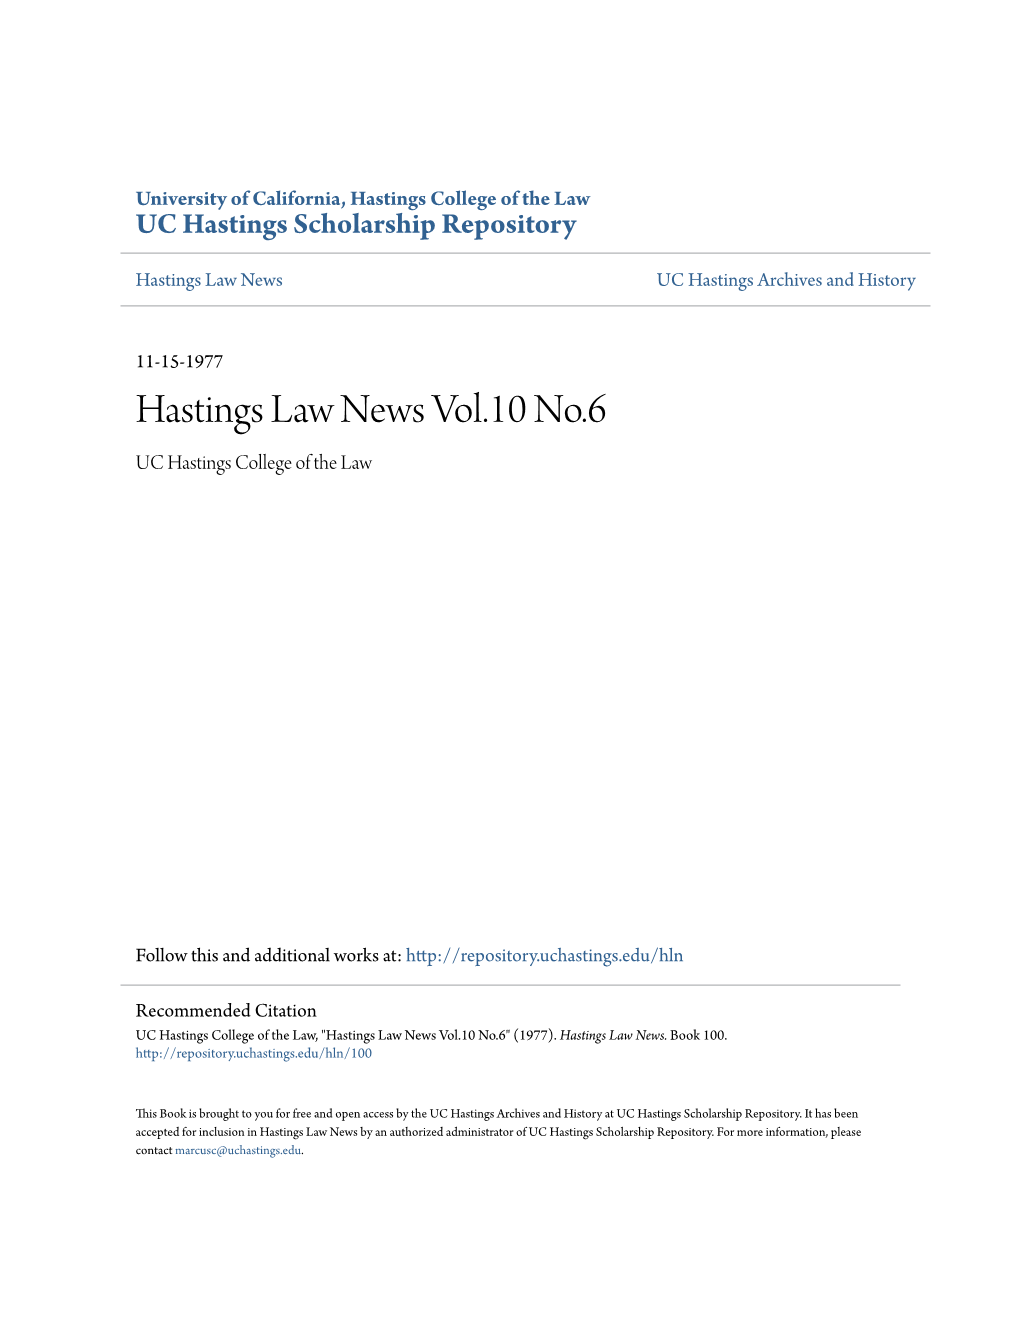 Hastings Law News Vol.10 No.6 UC Hastings College of the Law